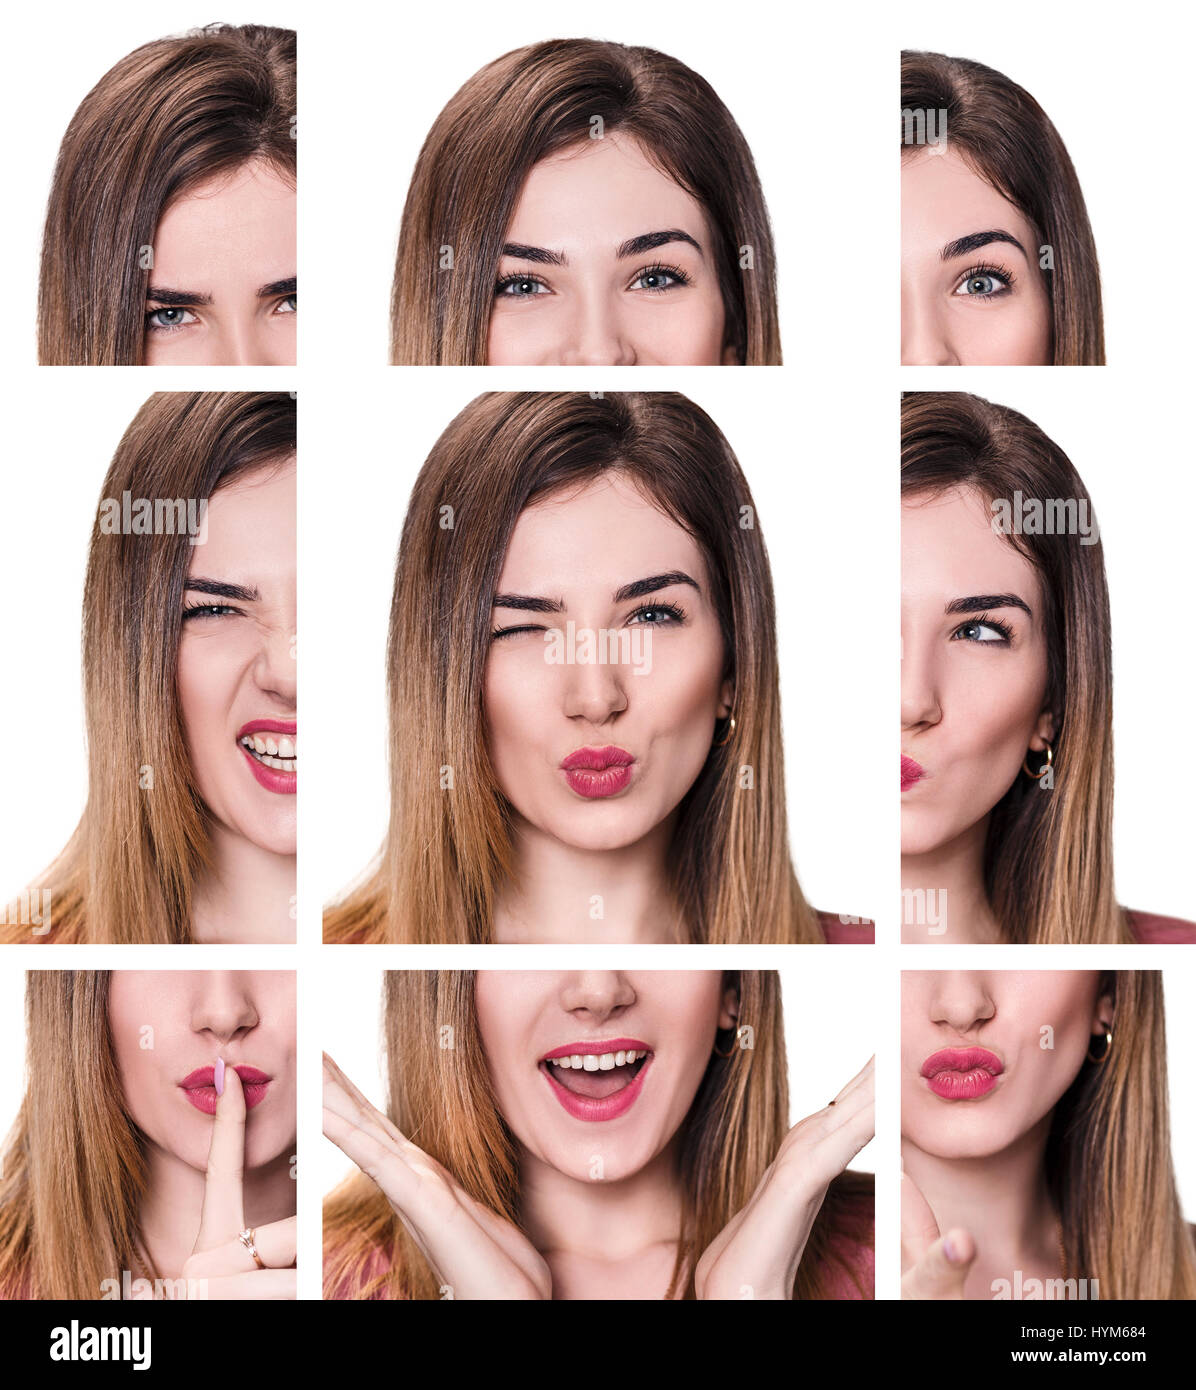 Collage of woman with different expressions Stock Photo